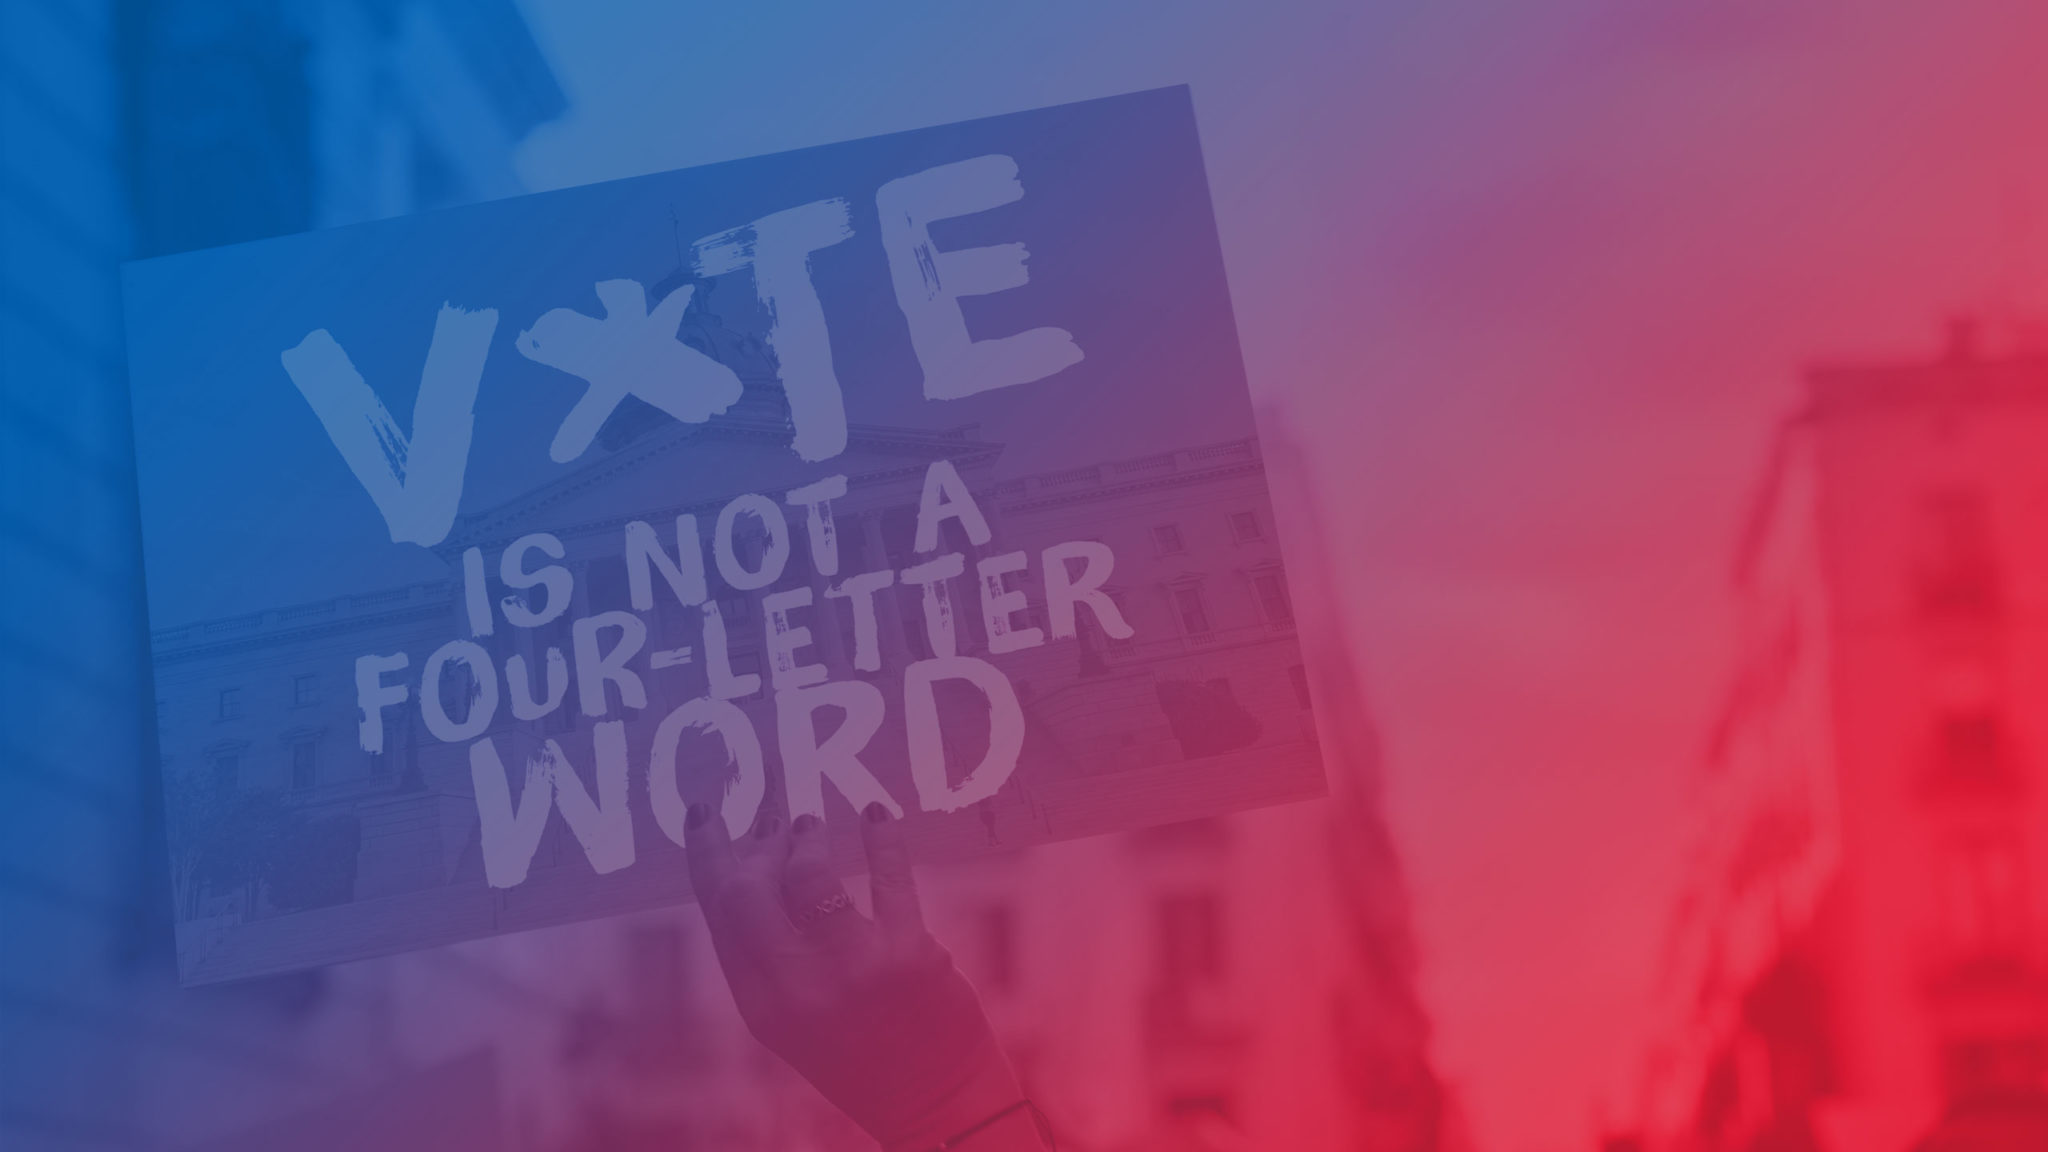 Person holding sign that says Vote Is not a 4-letter word with a blue to red gradient overlay on the image